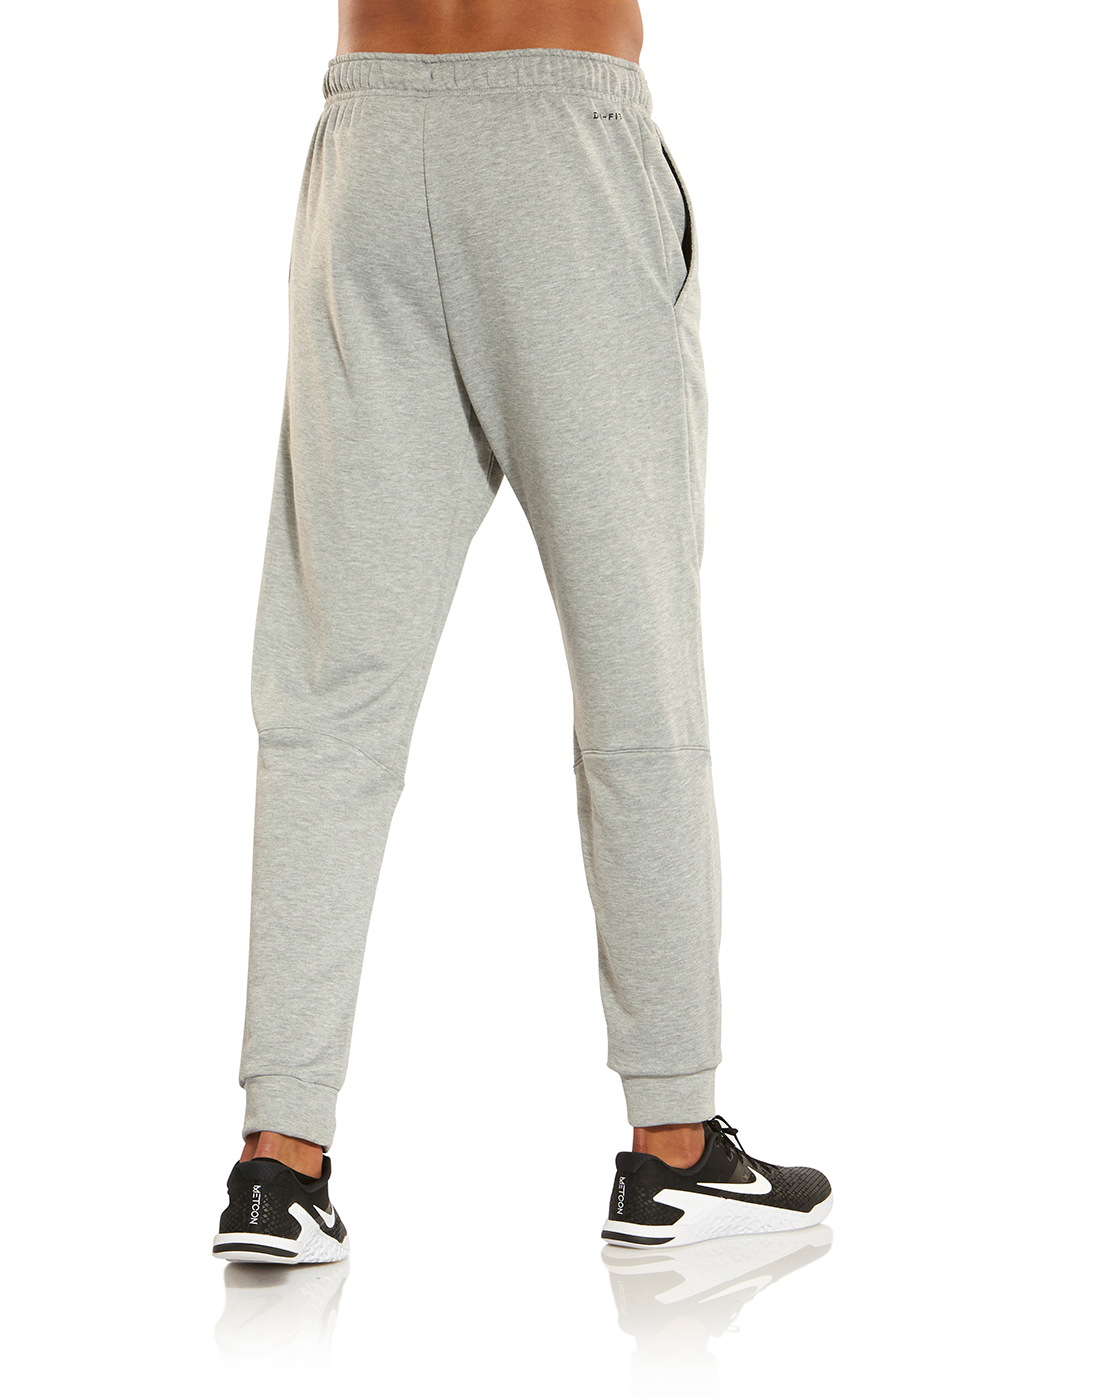 Men's Grey Nike Tapered Gym Pants | Life Style Sports